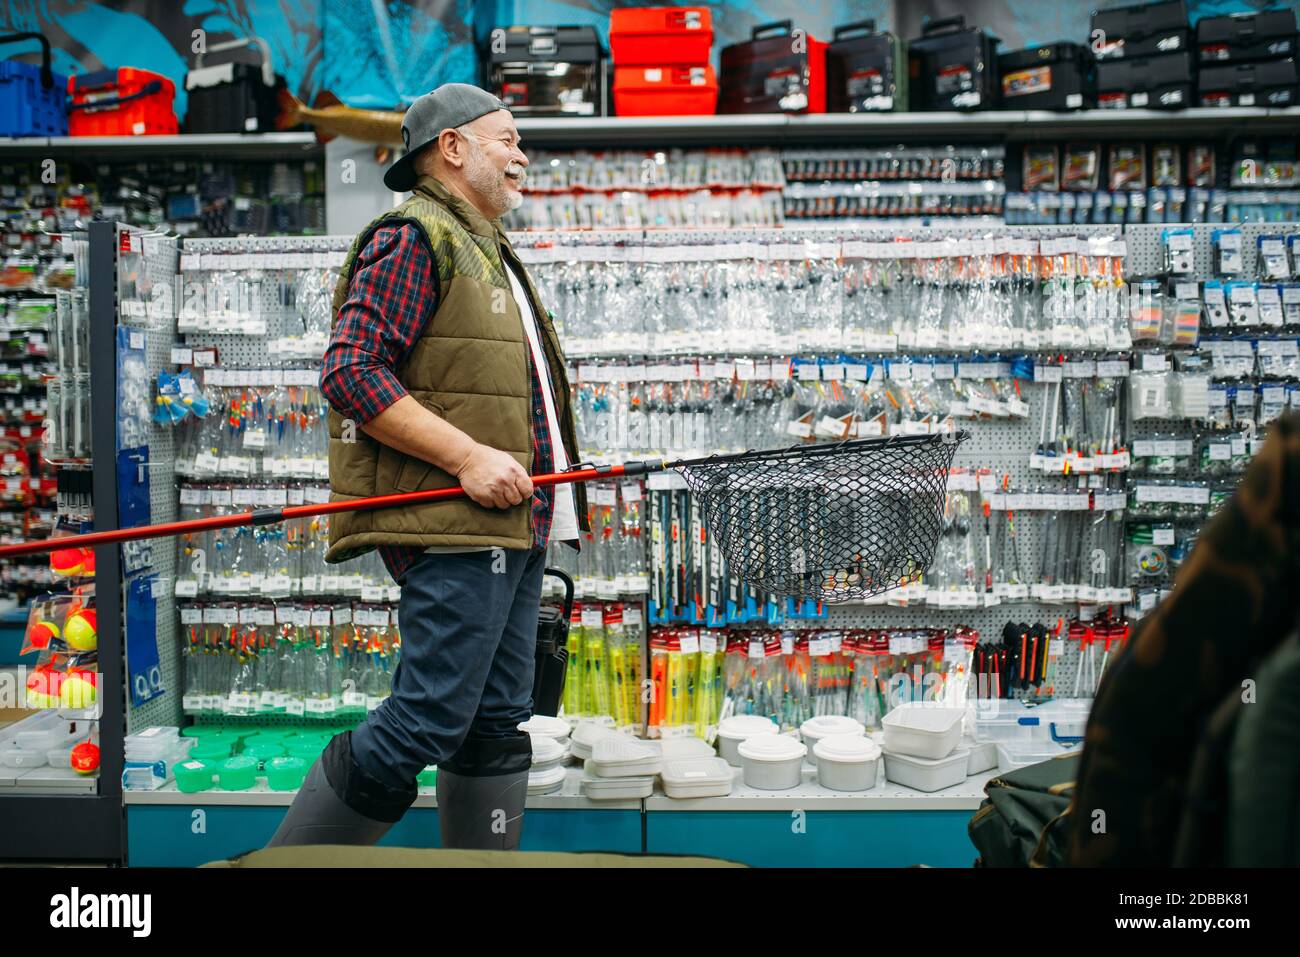 Fisherman with net and toolbox in fishing shop, hooks and baubles